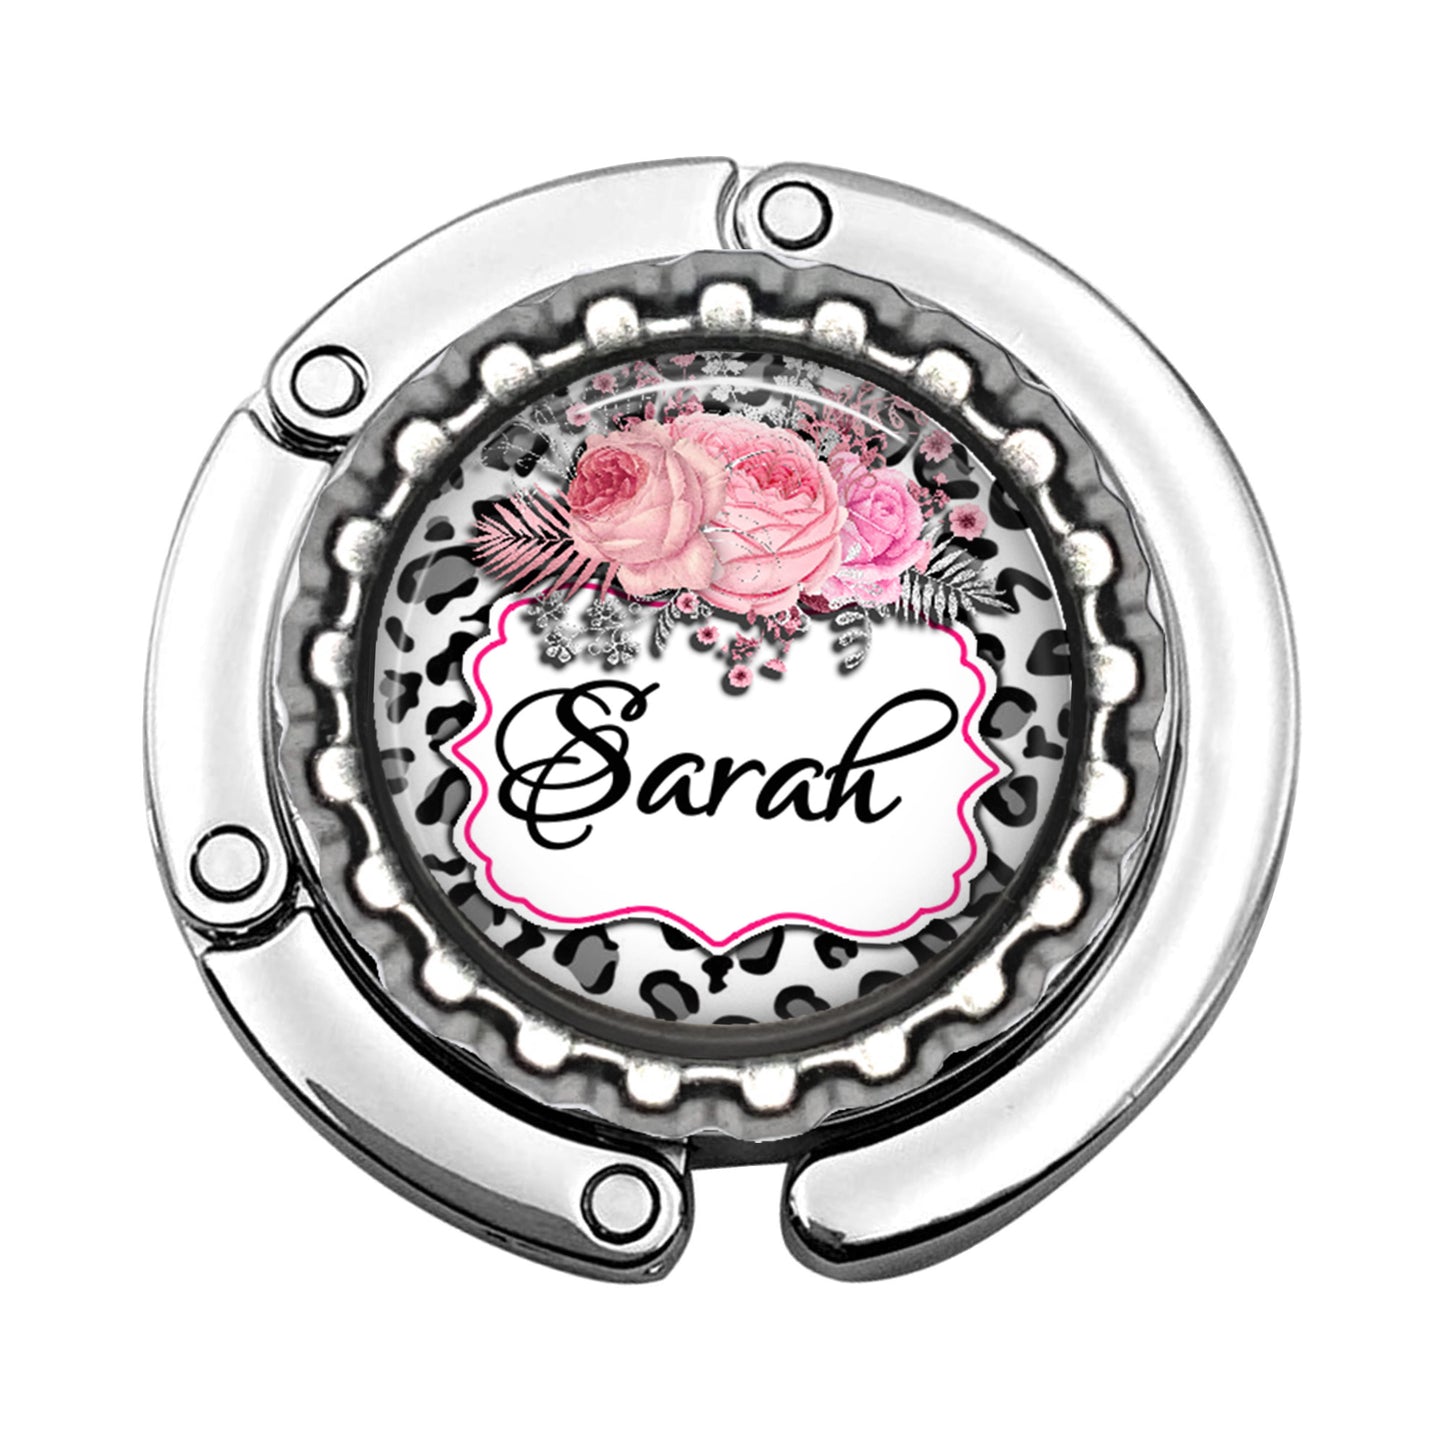 a metal object with a pink rose on it